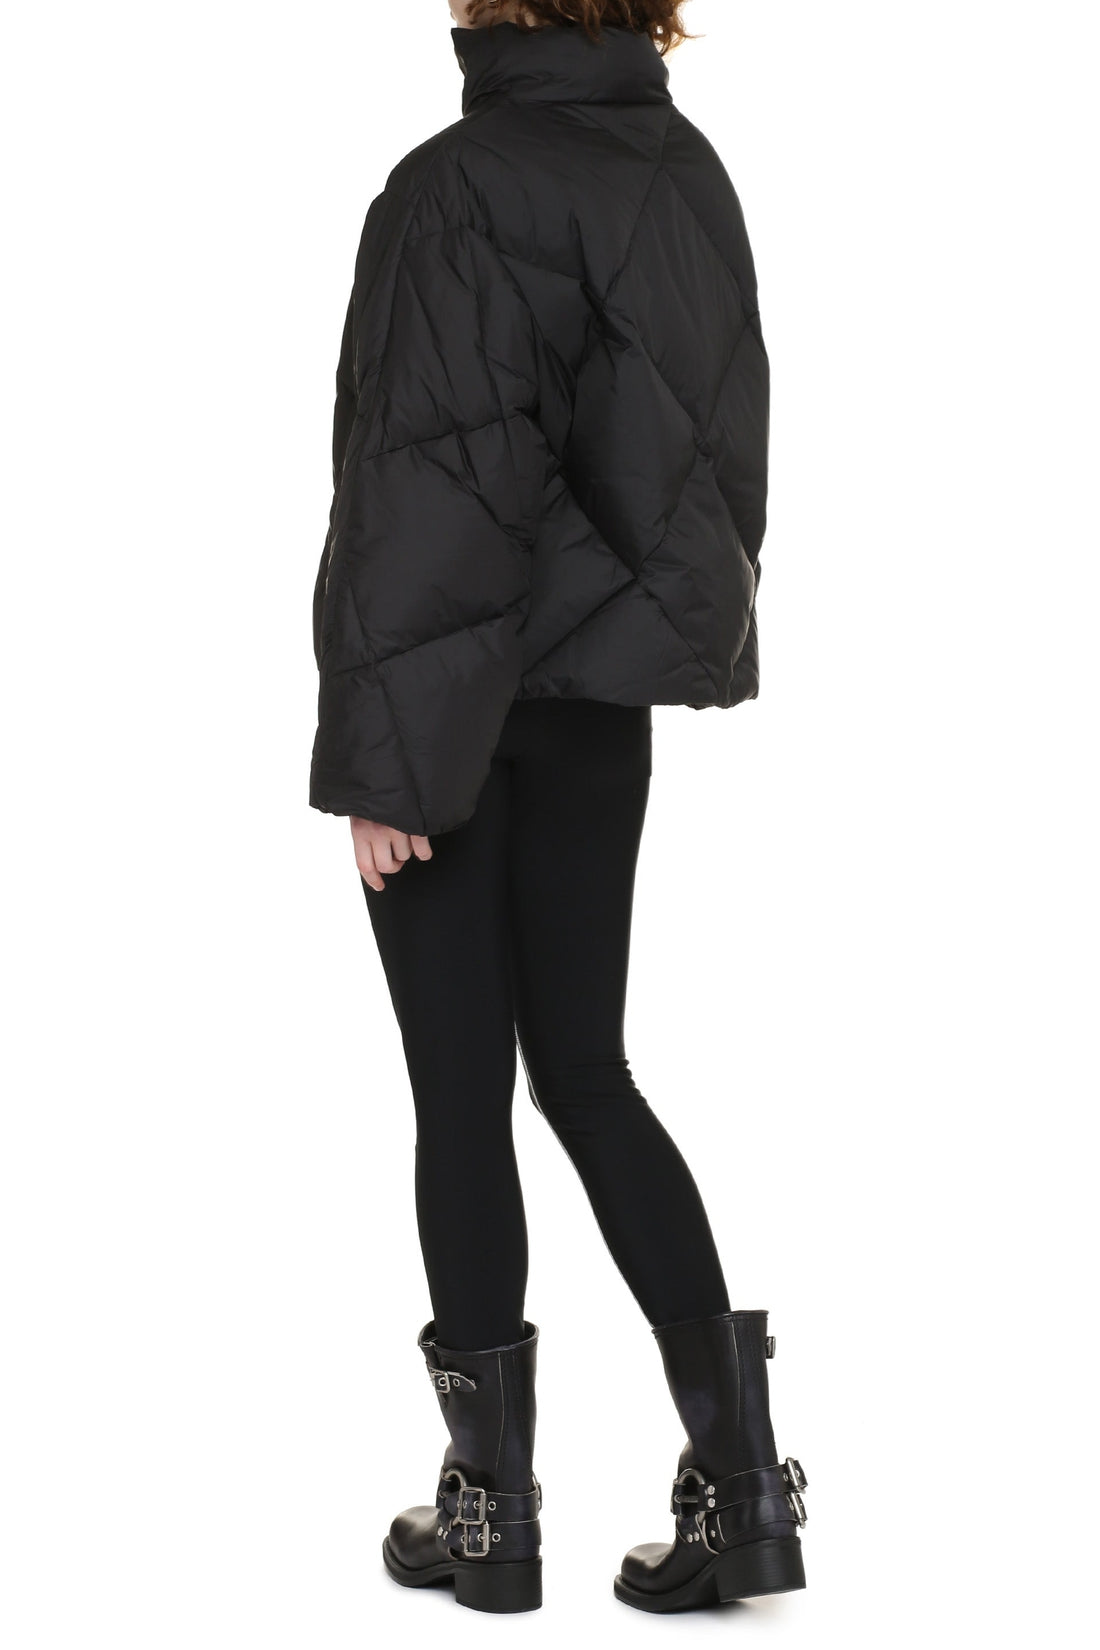 Stand Studio-OUTLET-SALE-Aina down jacket with zip and press studs-ARCHIVIST